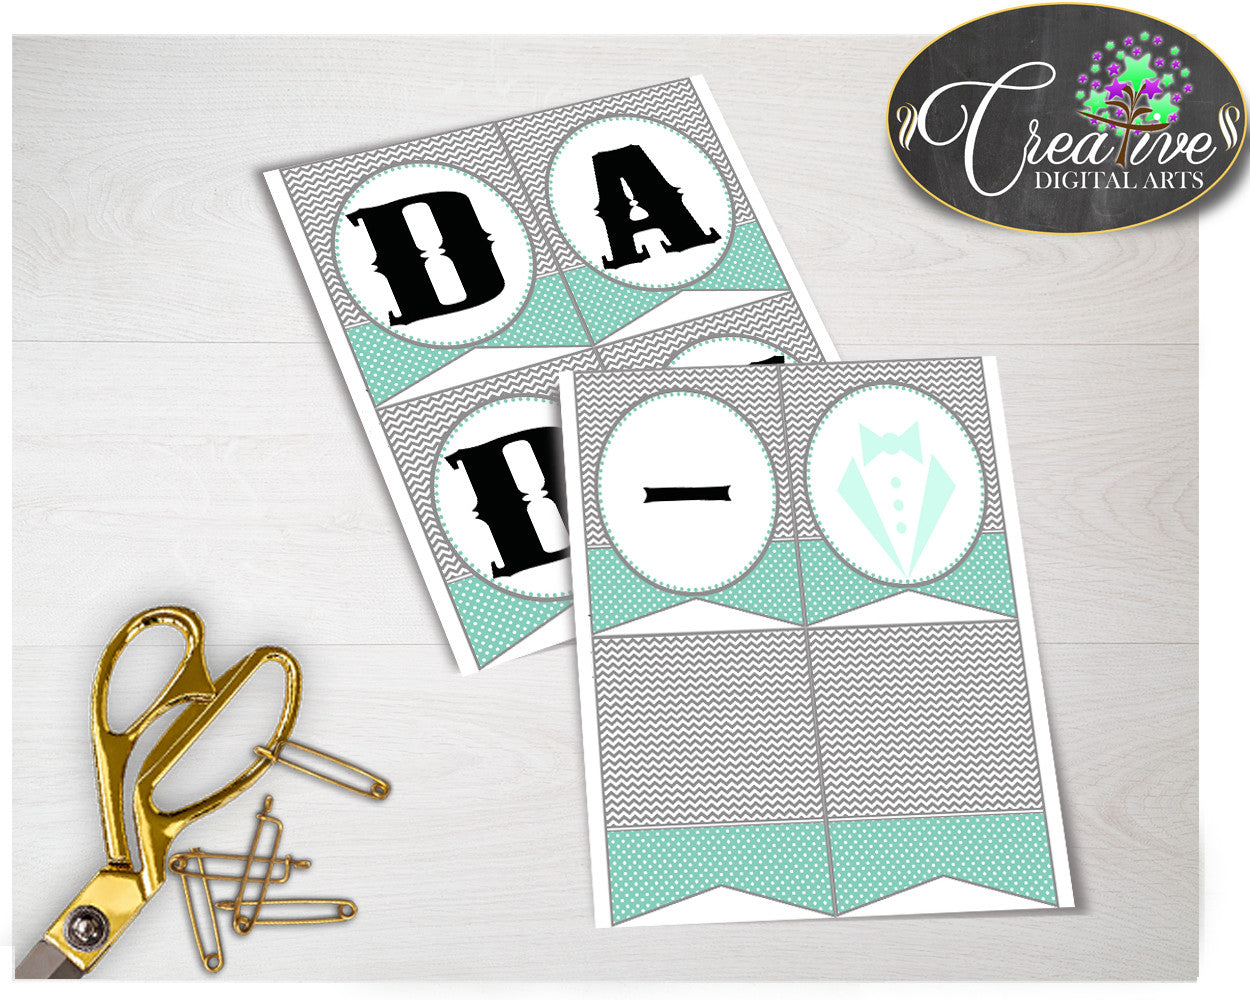 Baby shower little man CHAIR BANNER boy gentleman decoration printable in mint green gray theme, digital files, instant download - lm001